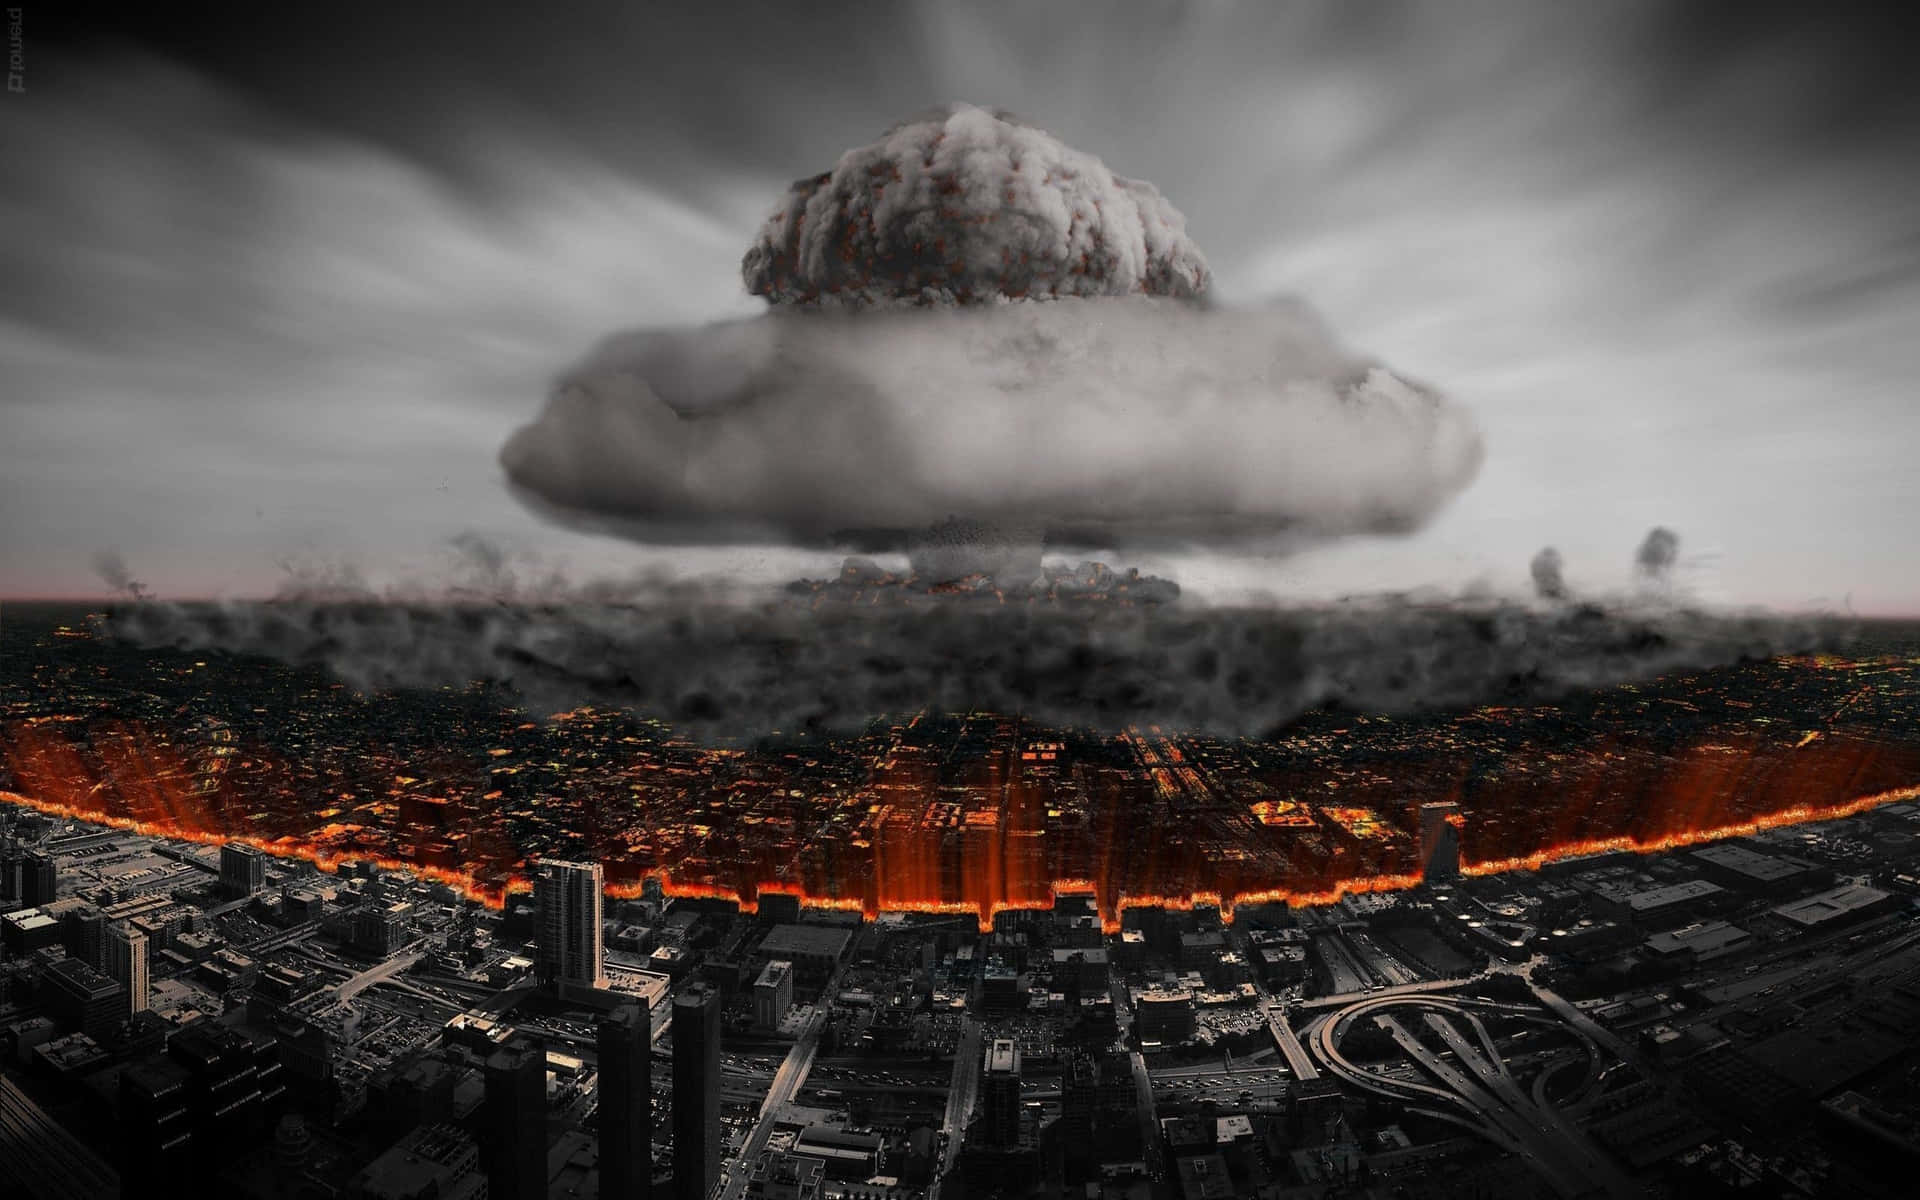 Fallout Nuke Explosion in a Post-apocalyptic Wasteland Wallpaper